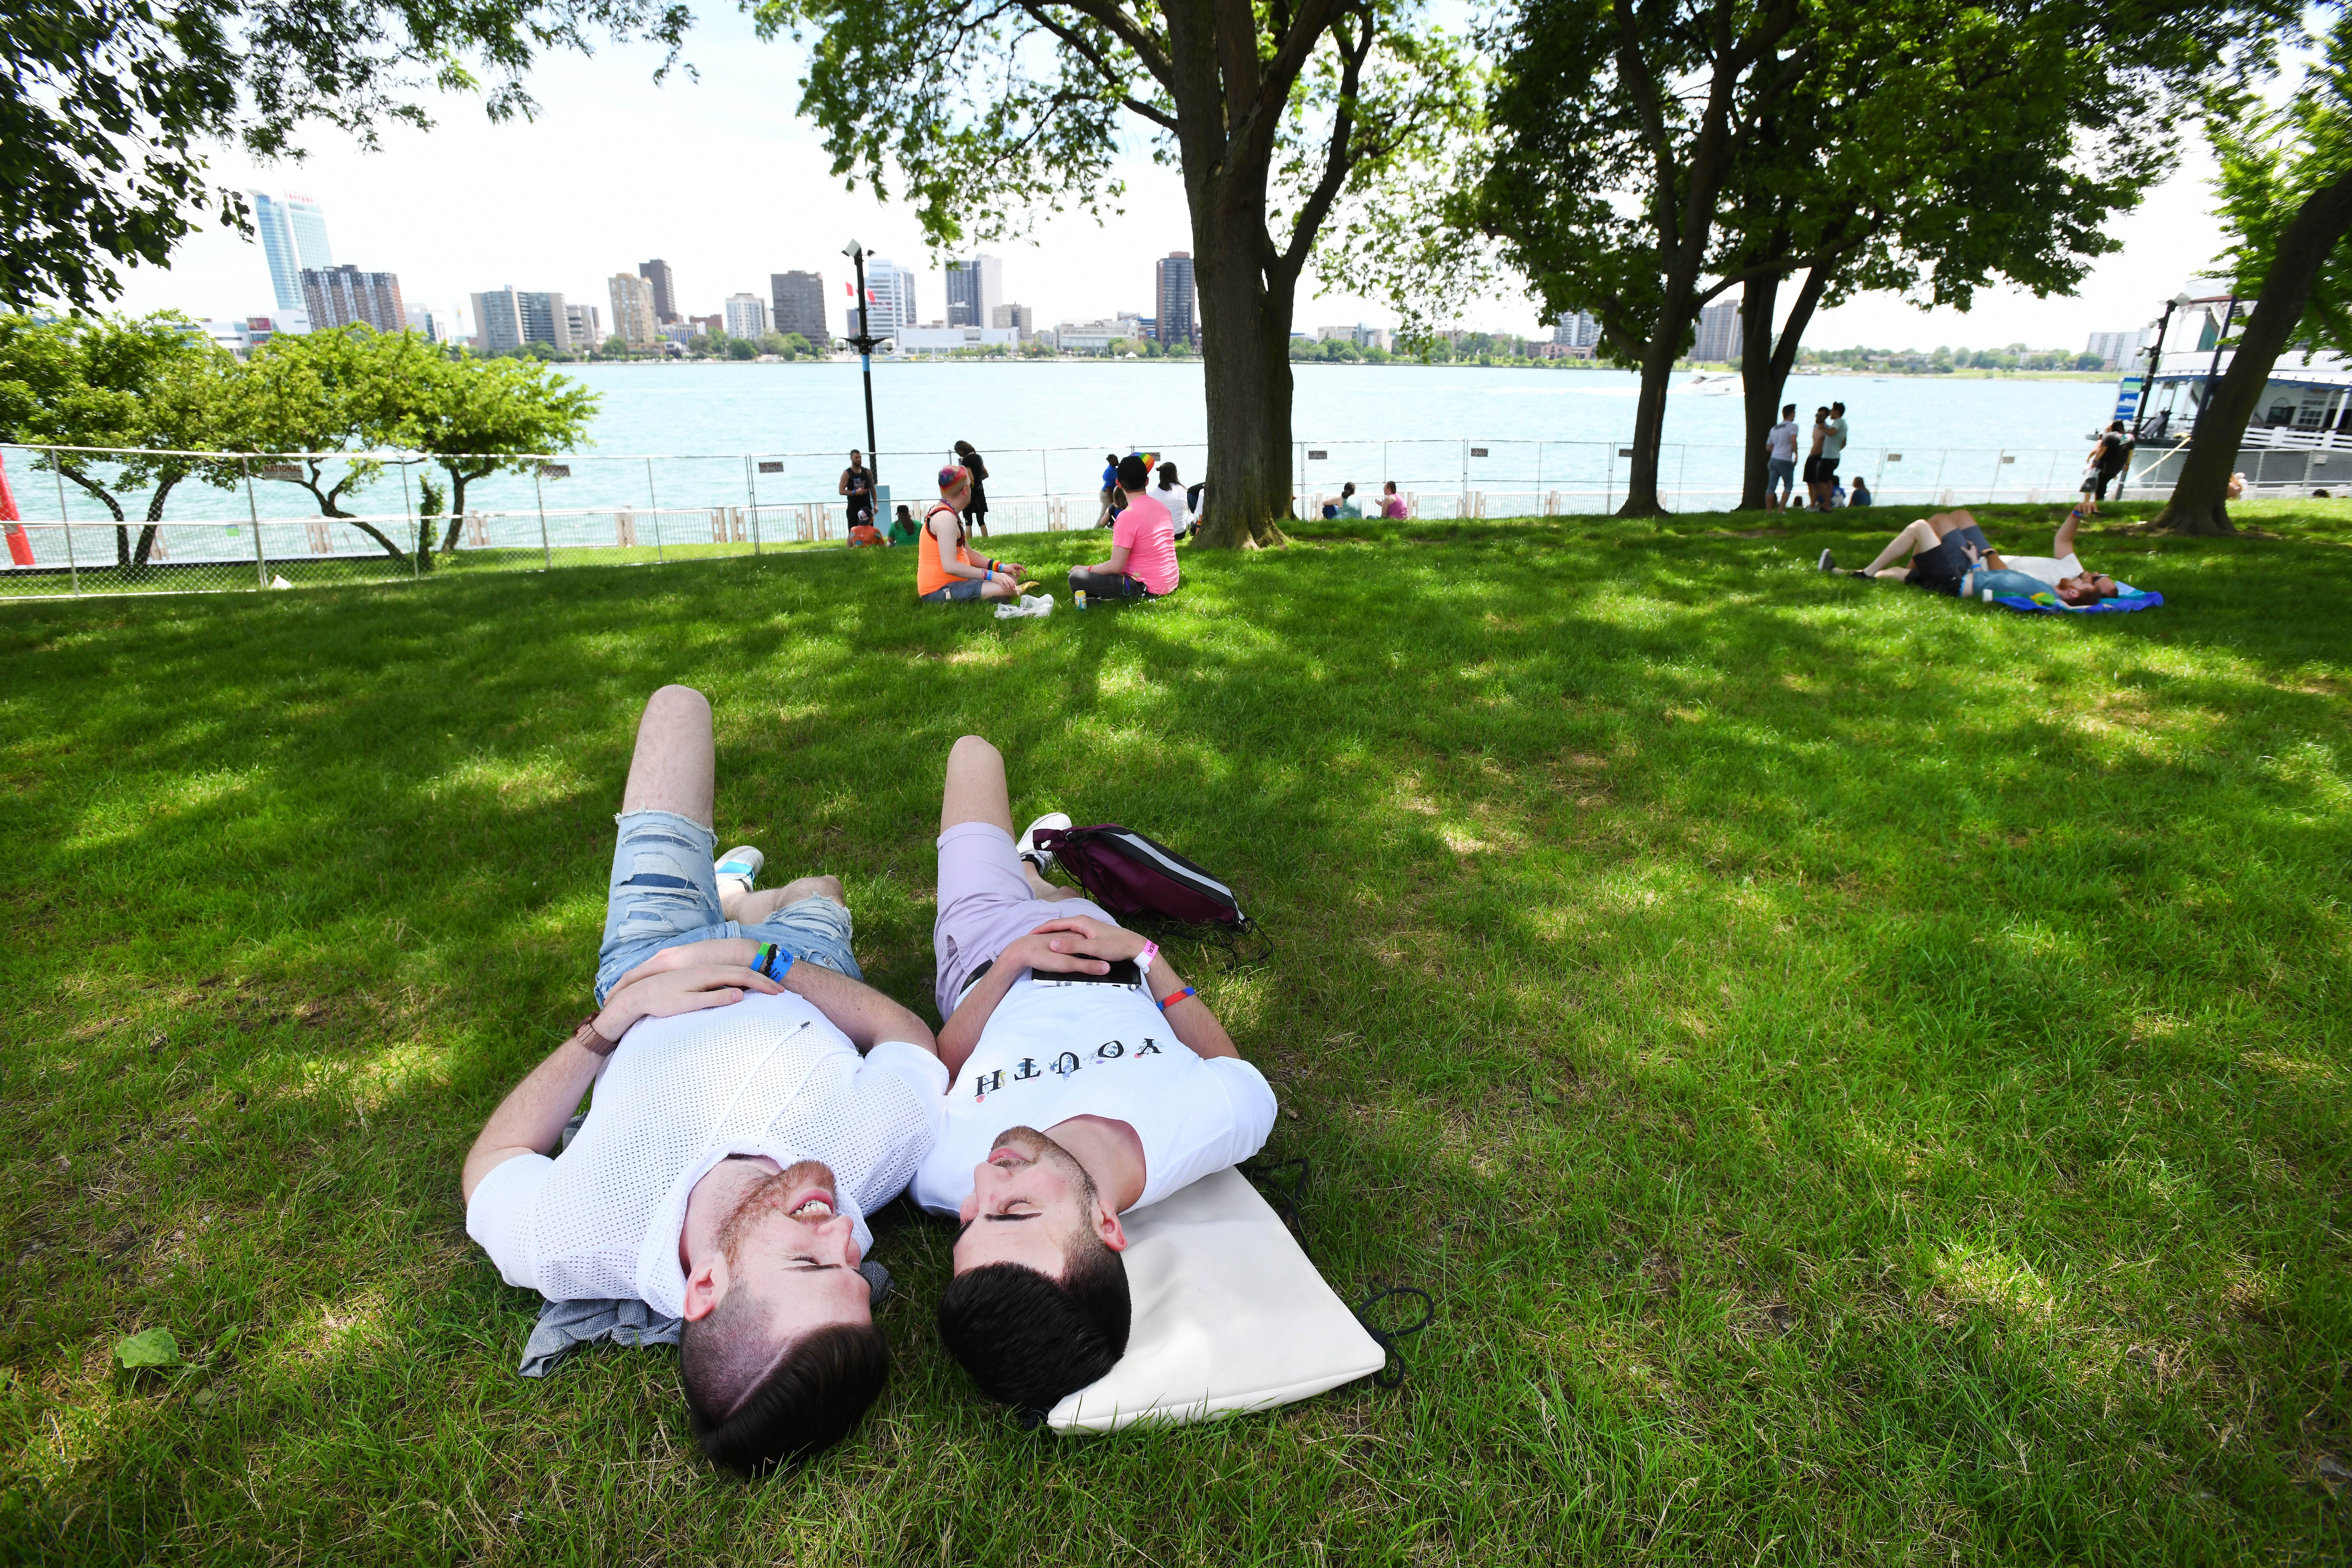 Claudio Martini and Sam Shehedeh relax in the shade along the Detroit River during the Motor City Pride festival in Hart Plaza in Detroit, Michigan on Saturday, June 8, 2019.